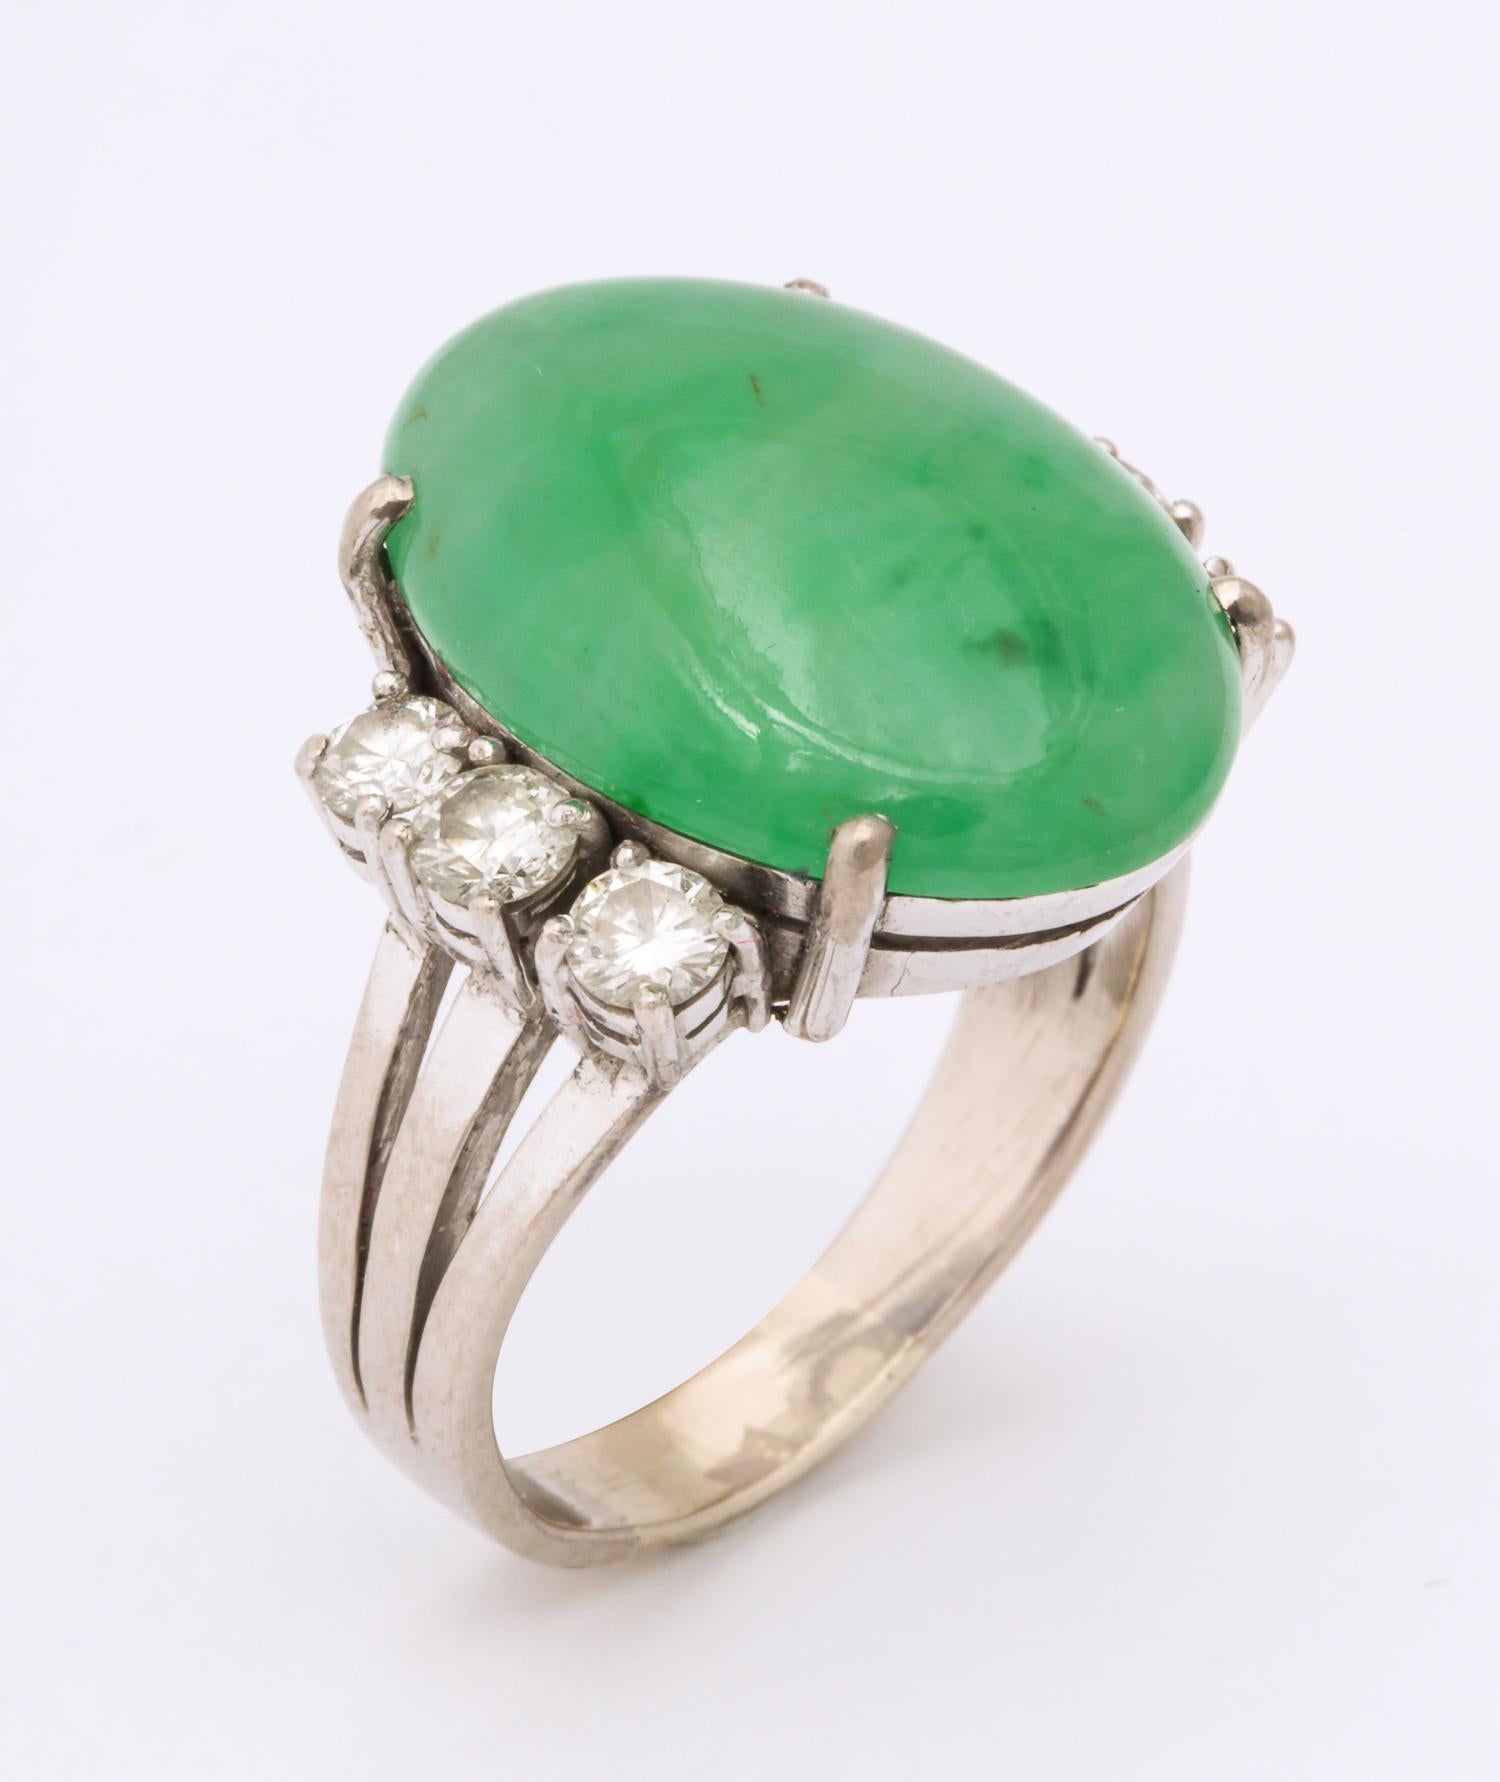 One Elegant Oval Cut Beautiful Color Jadeite Ring Centering A 22MM Oval Jade And Flanked By Six Full Cut Diamonds Weighing Approximately .15 Cts Each ,Total Weight Of Diamonds .90Cts. Created In Platinum,Palladium And 18kt White Gold Shank.